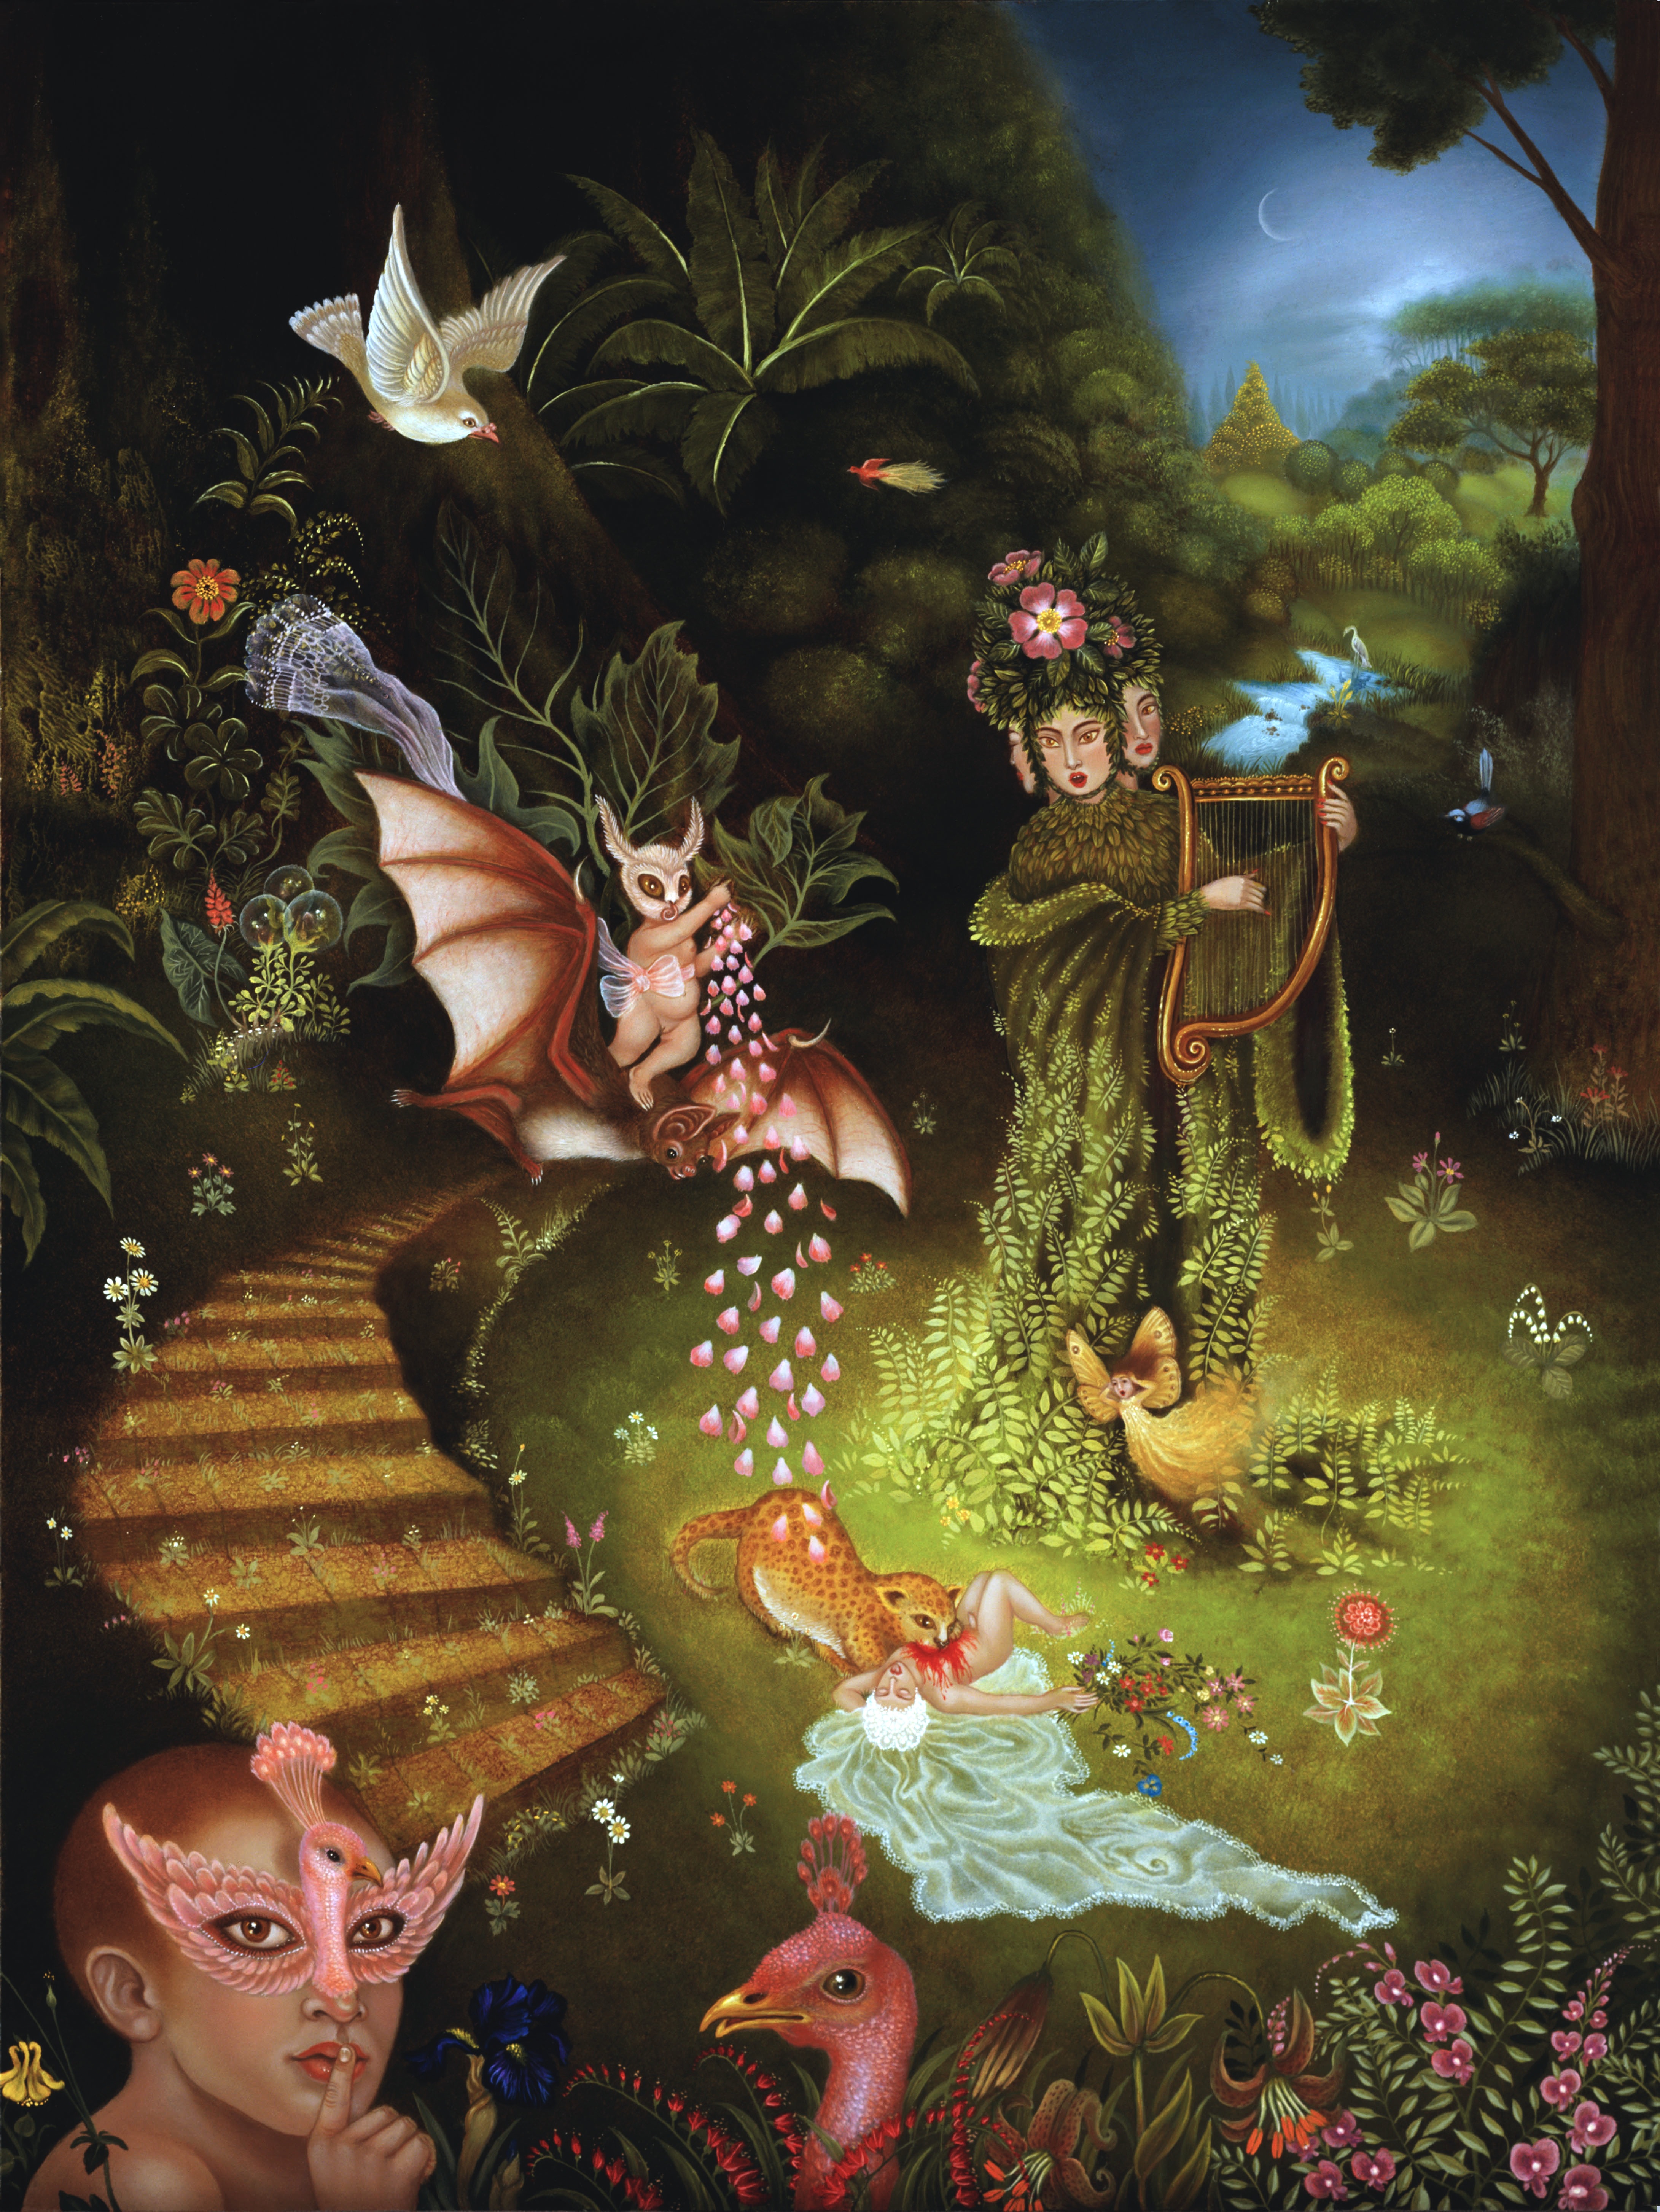 Tropical Lullaby, 2007. Oil on wood, 12" x 16." Courtesy of the artist.